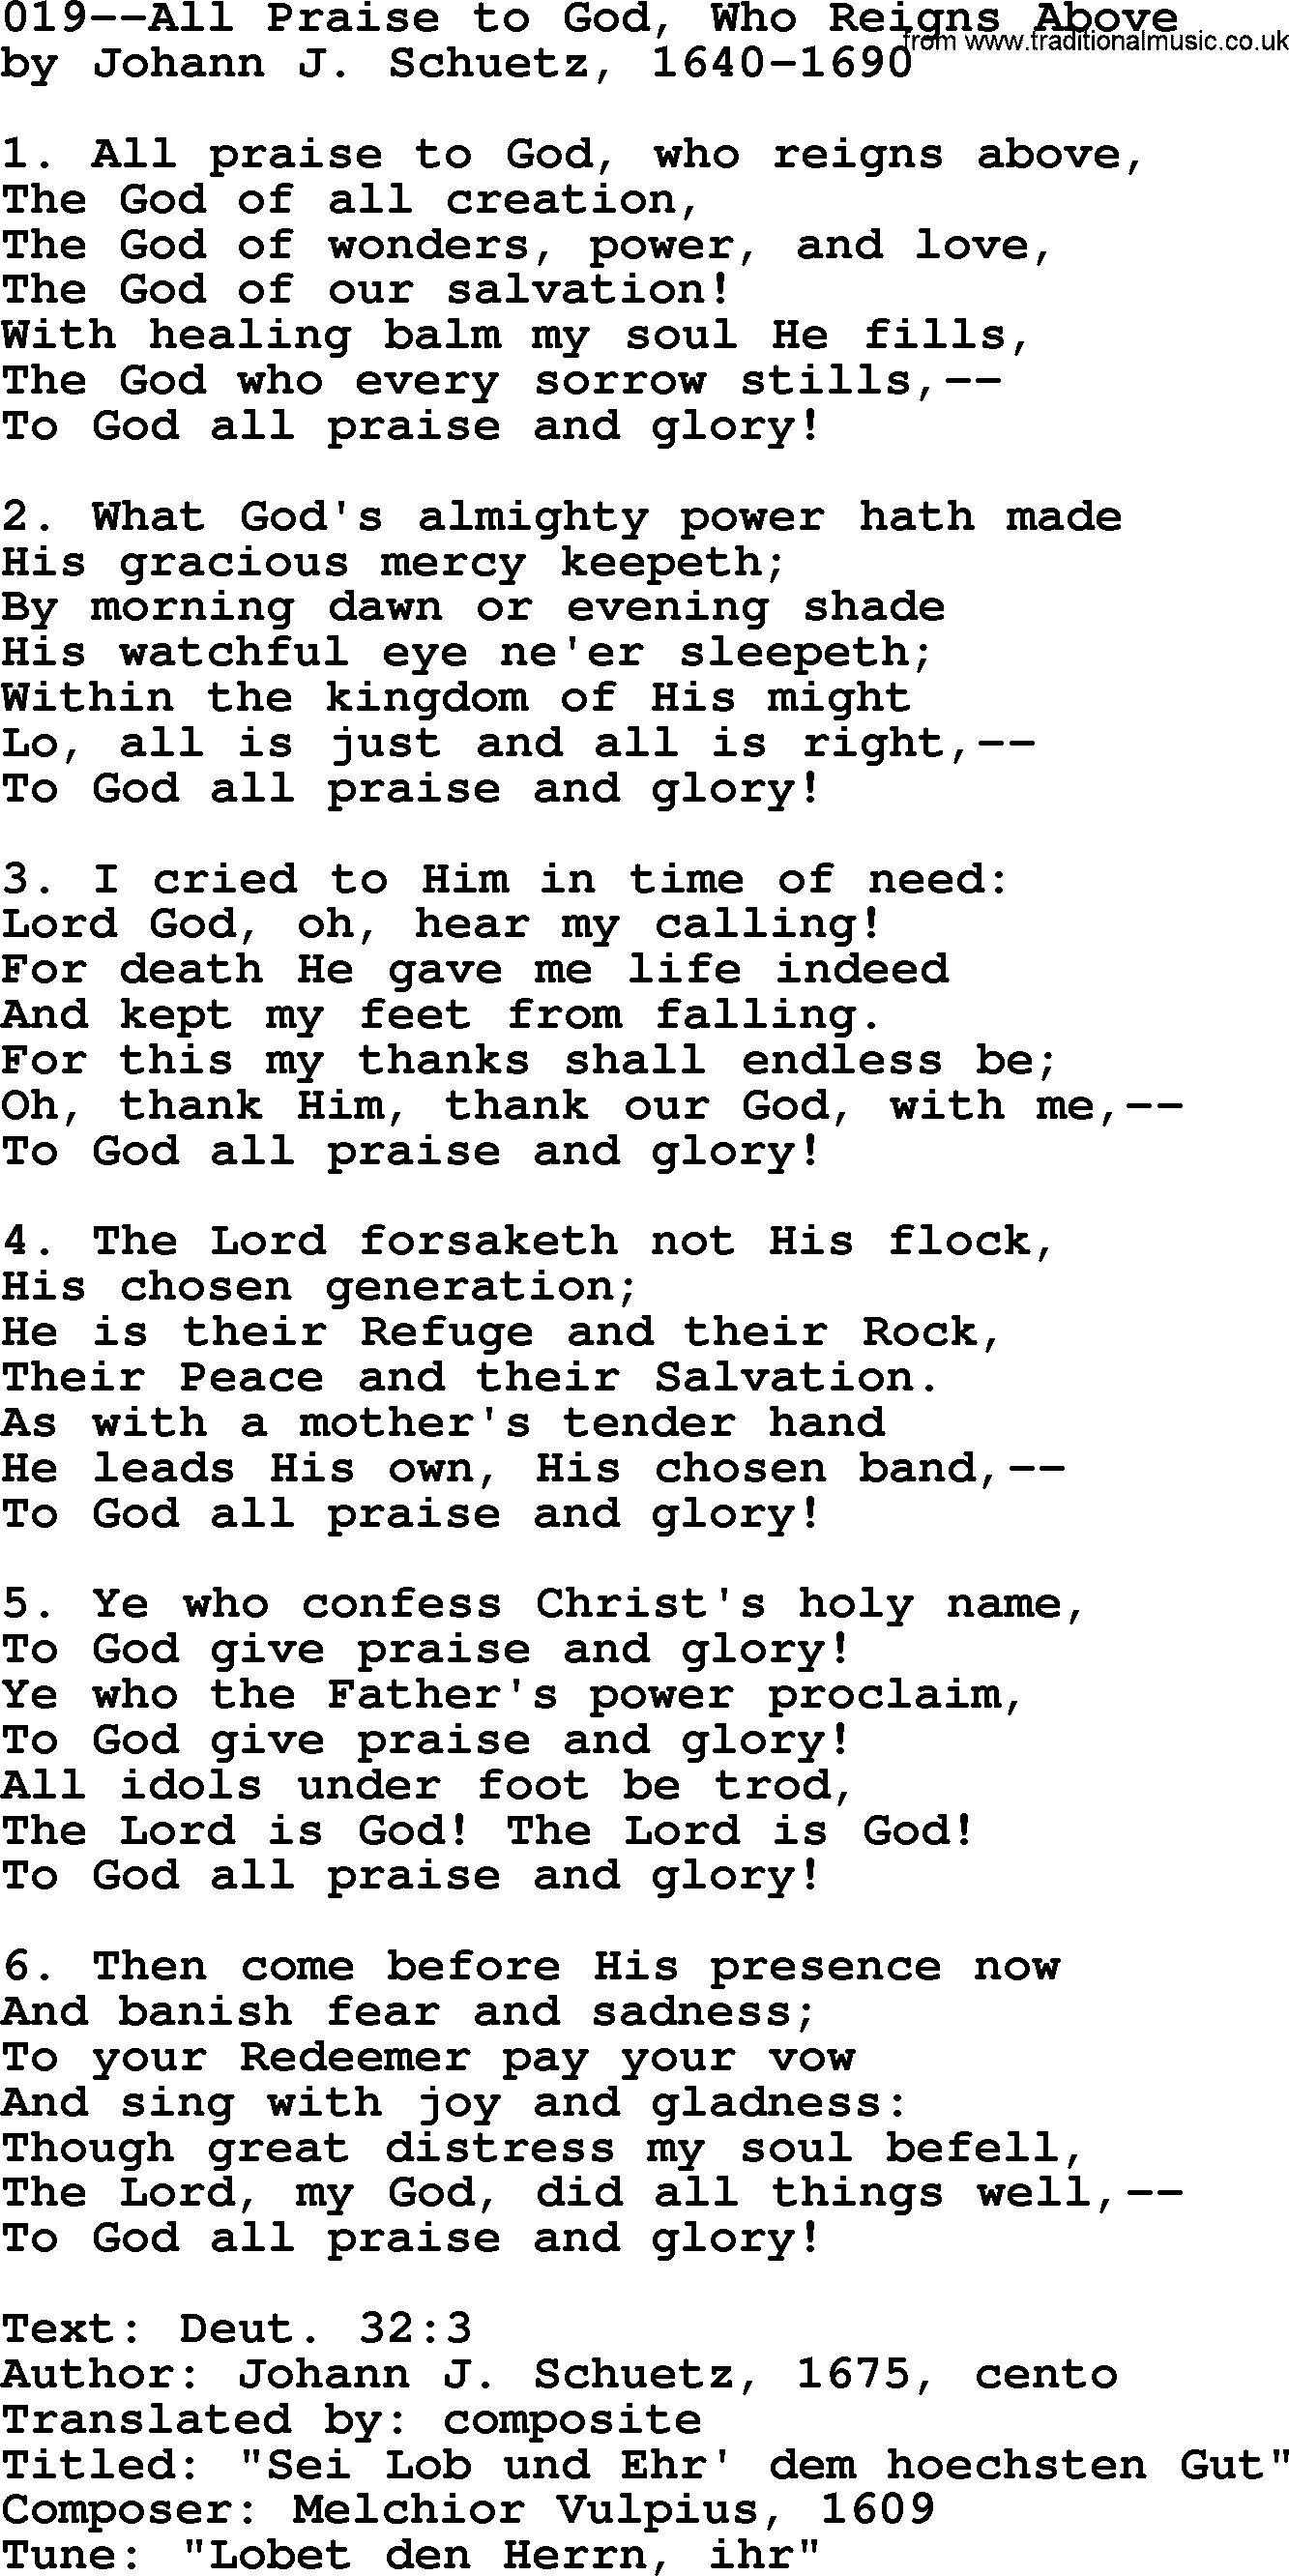 Lutheran Hymn: 019--All Praise to God, Who Reigns Above.txt lyrics with PDF